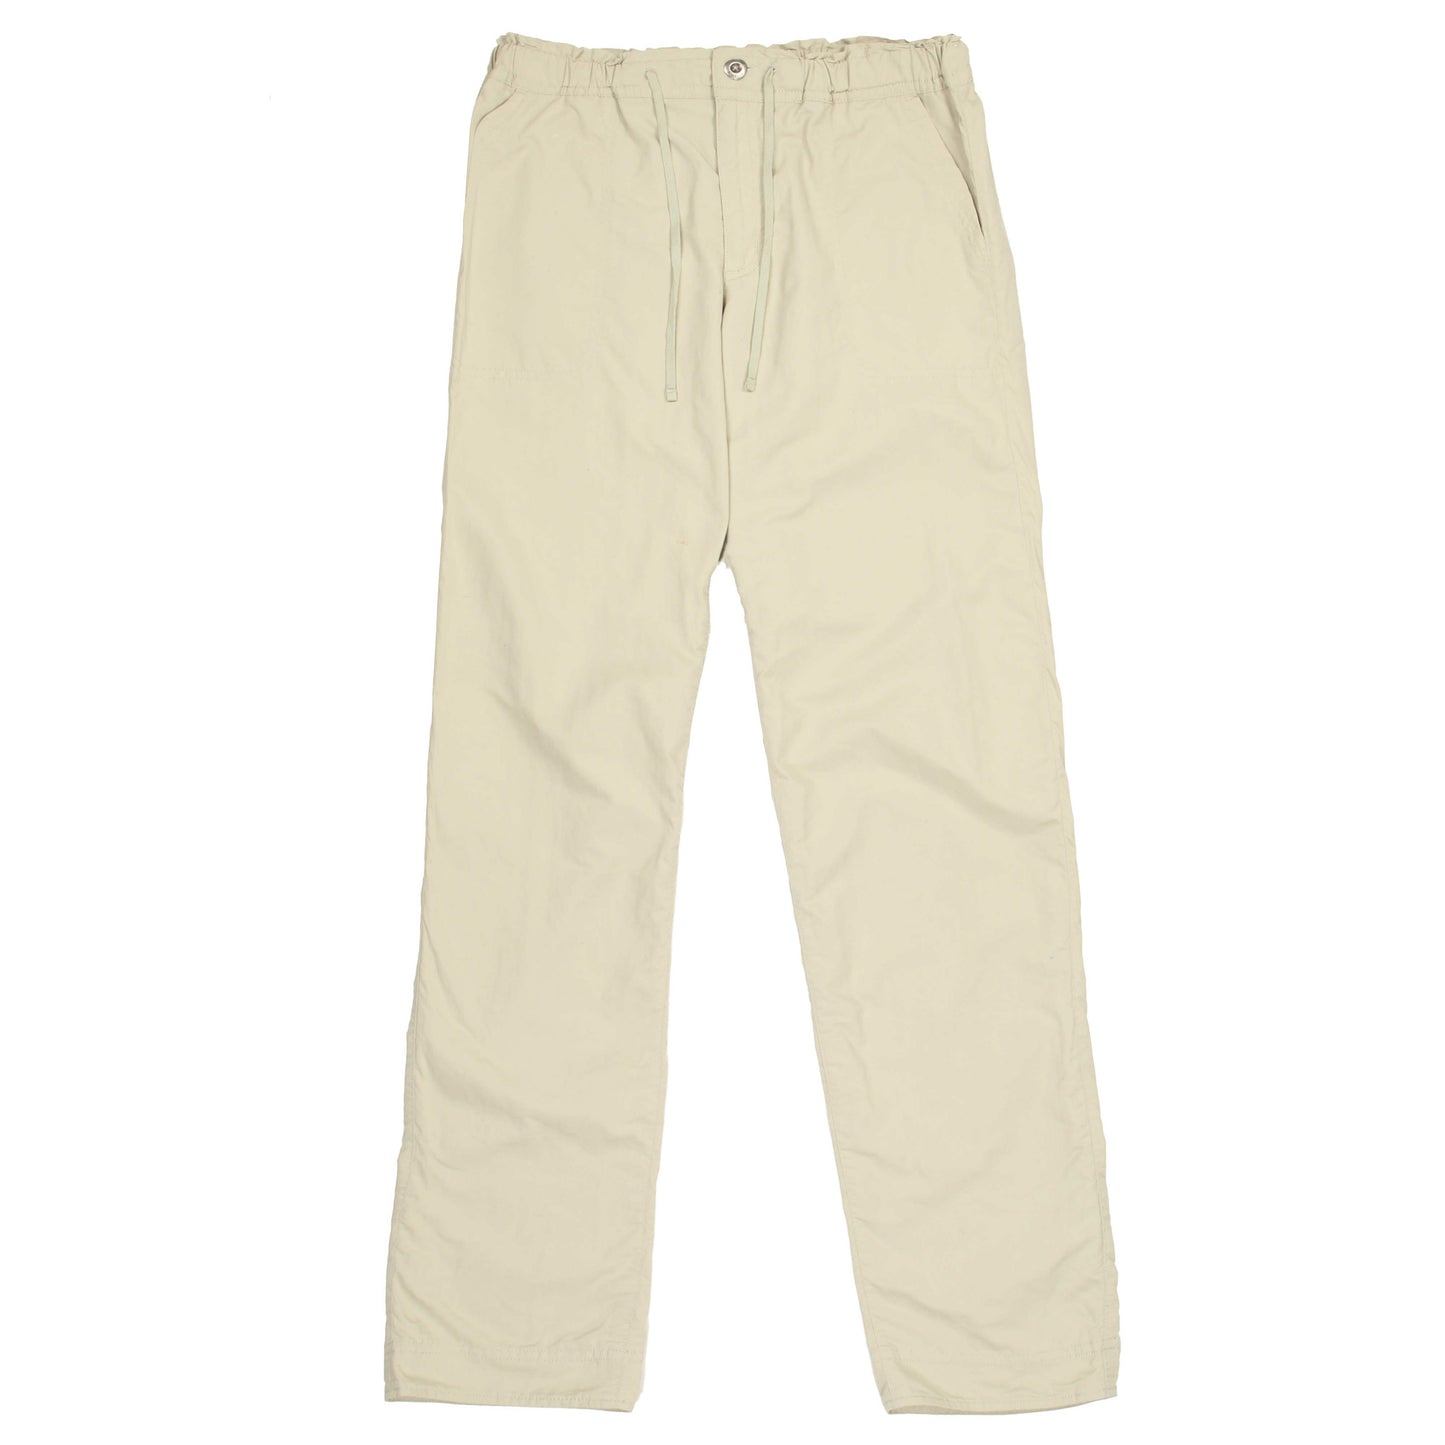 W's Upcountry Pants